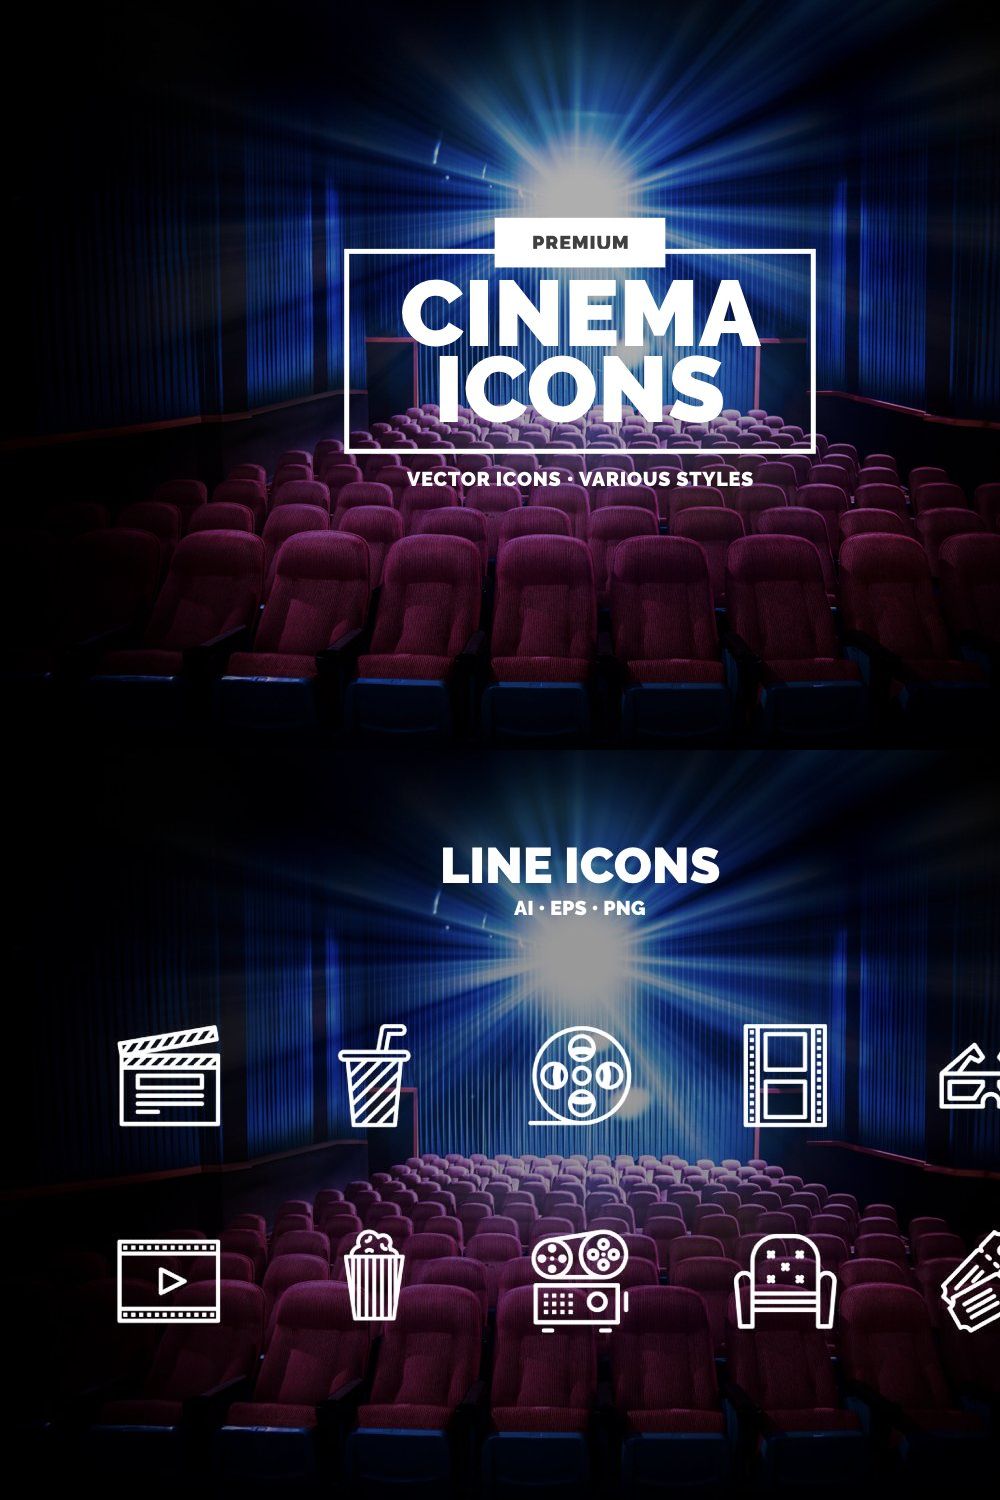 10 Cinema Icons in 3 styles pinterest preview image.